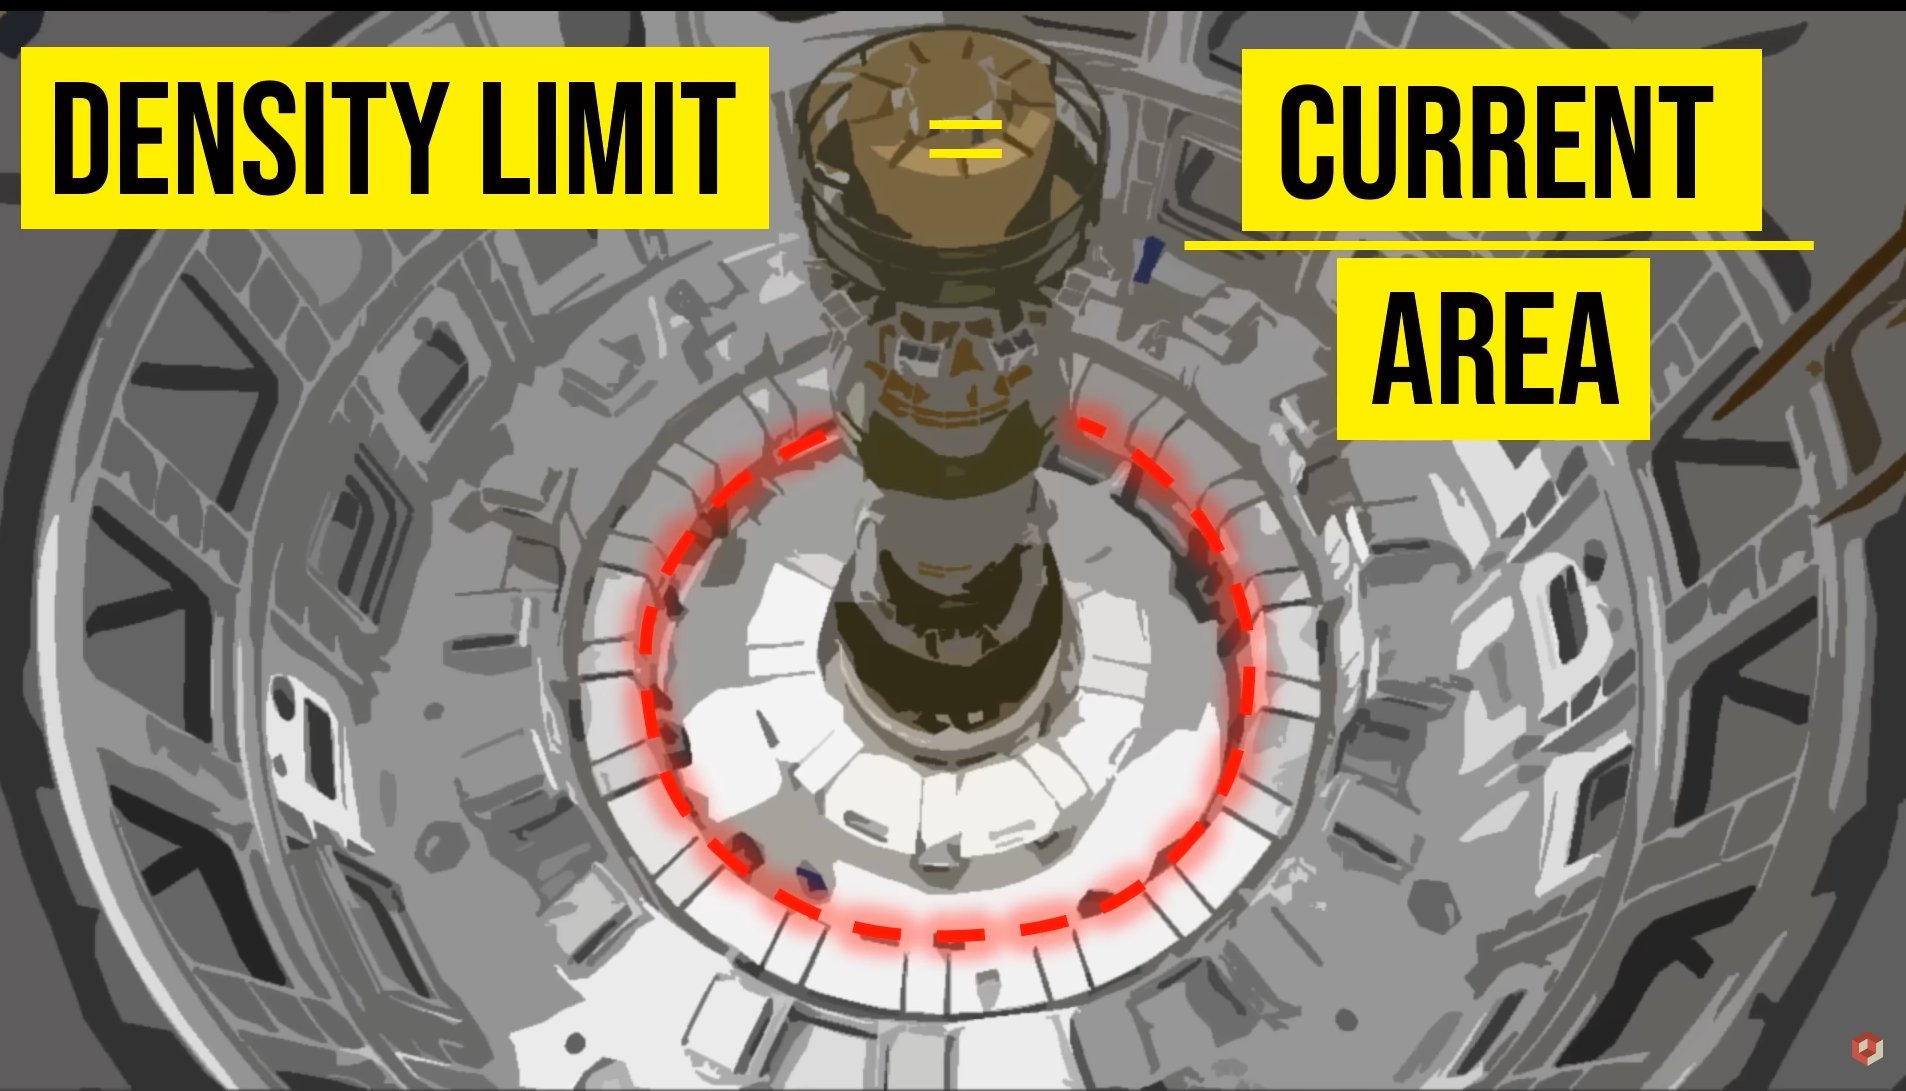 A new law unchains fusion energy